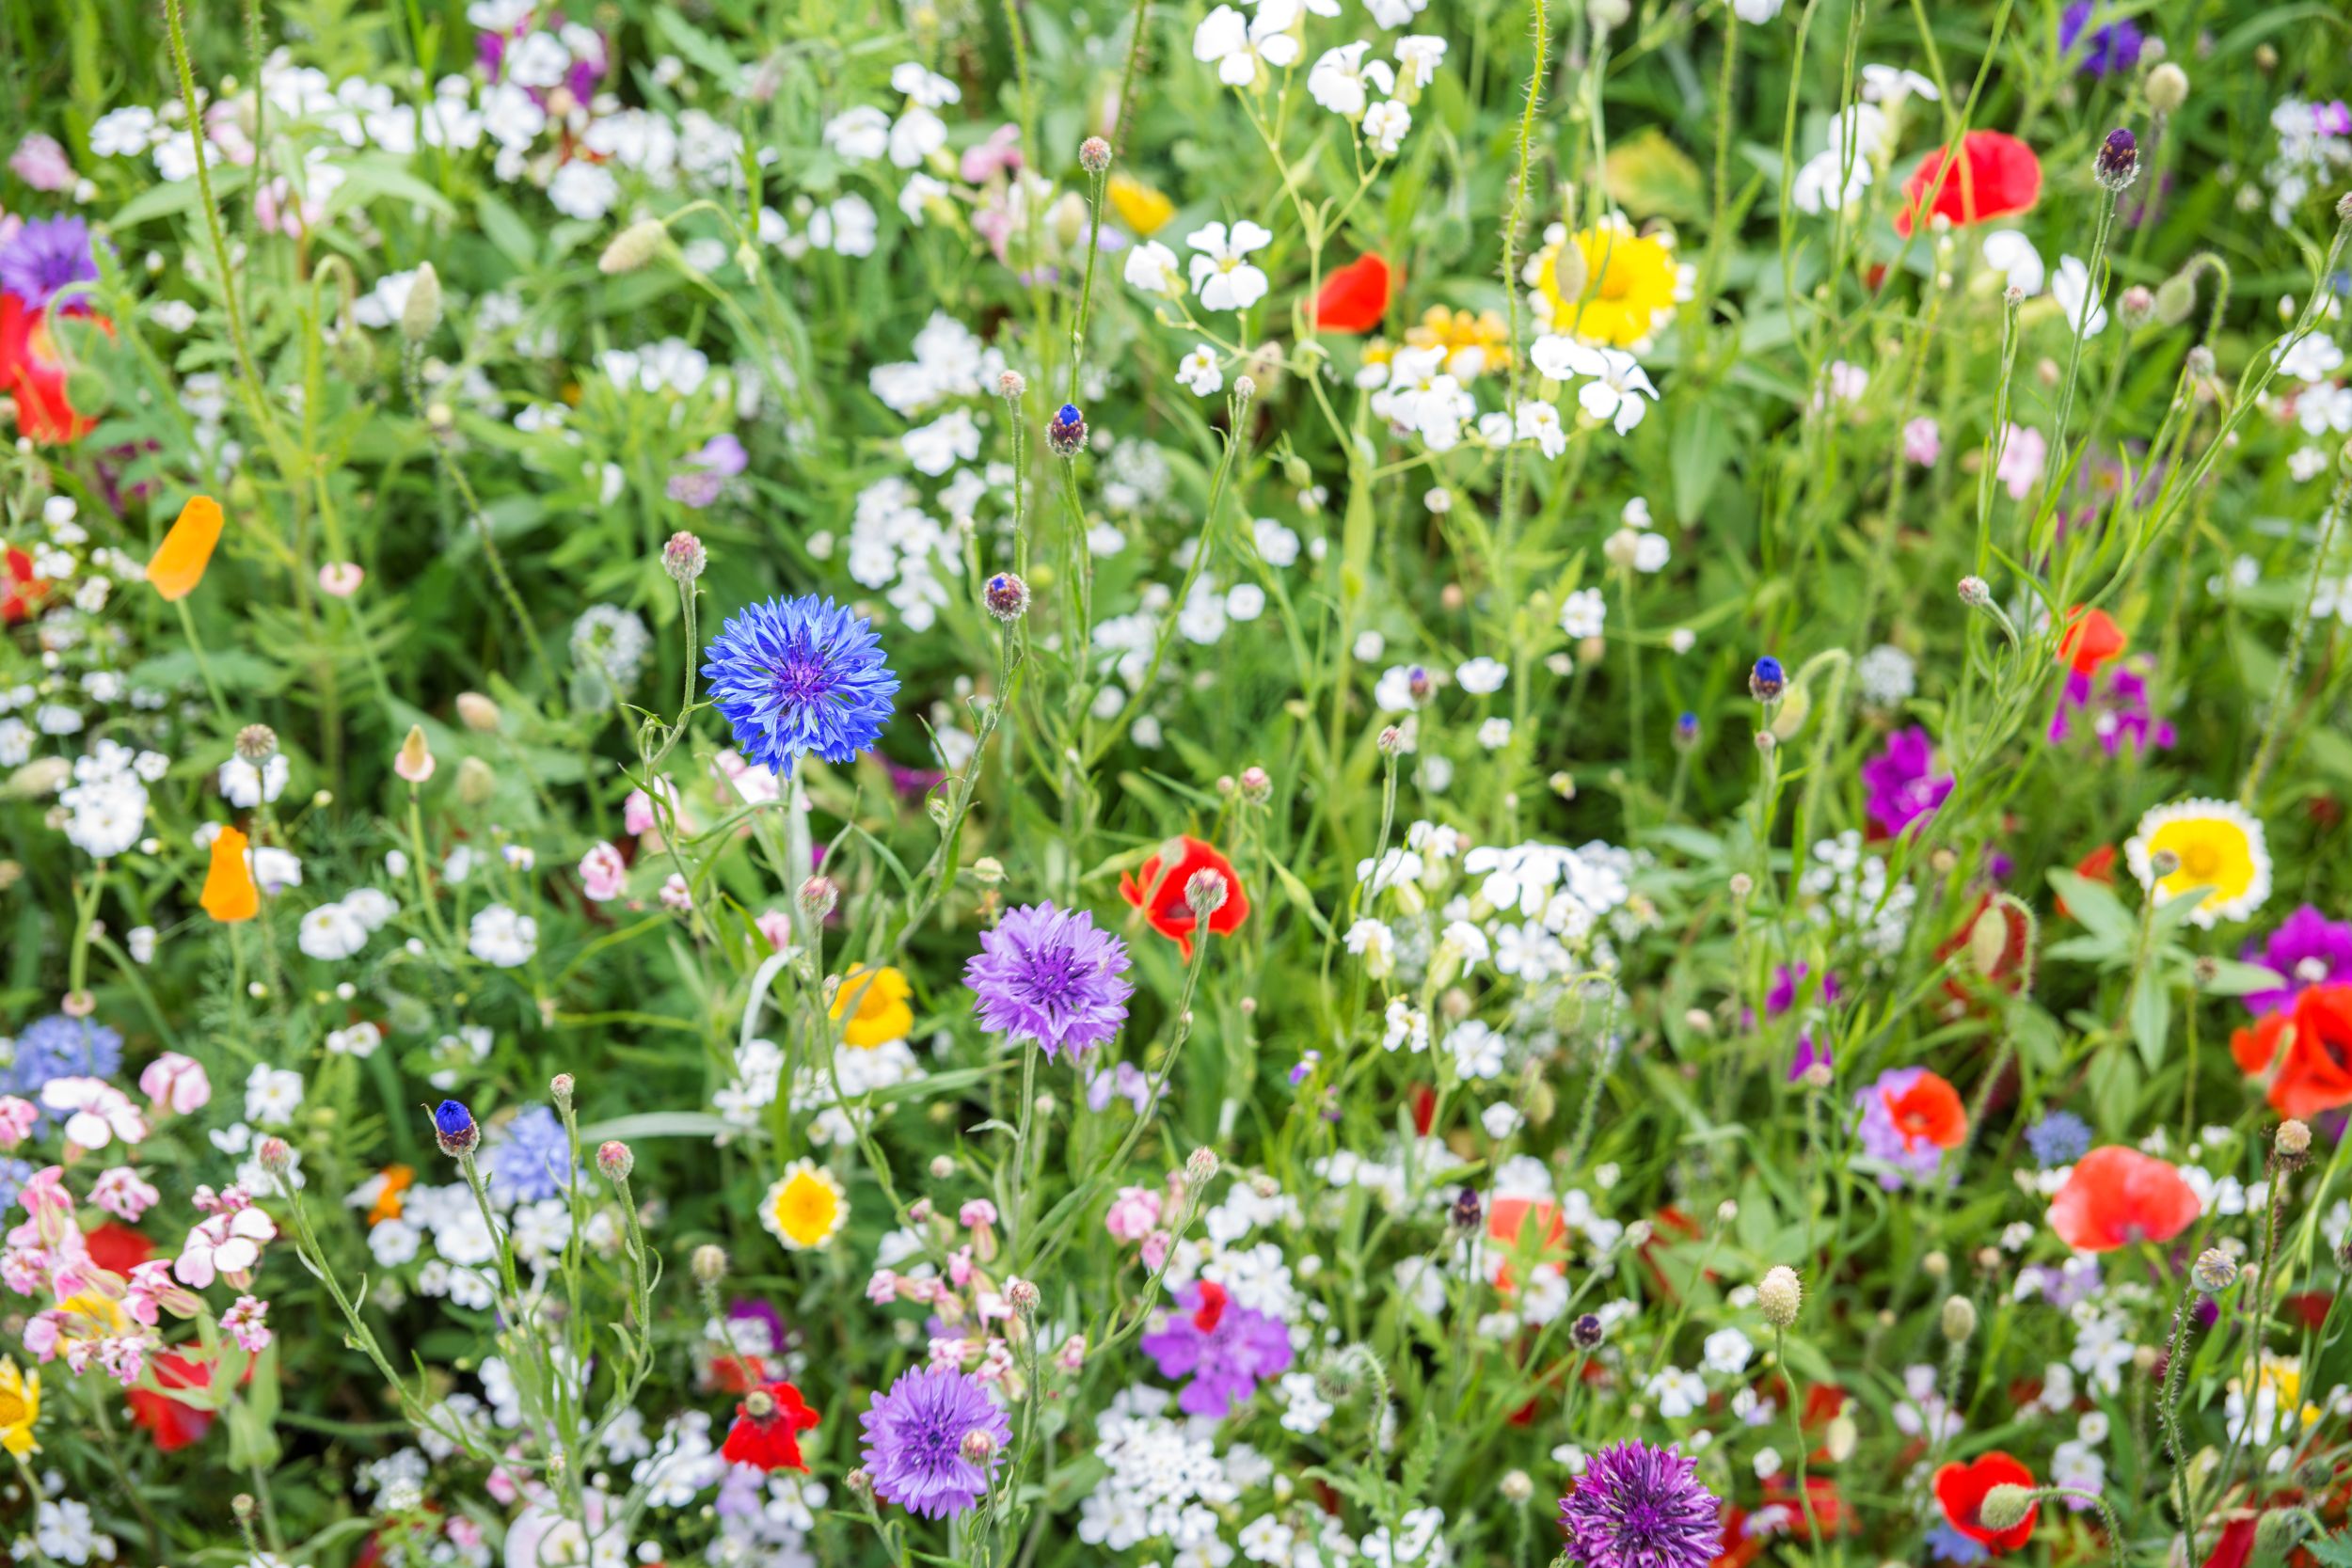 Wildflowers are wildly easy!